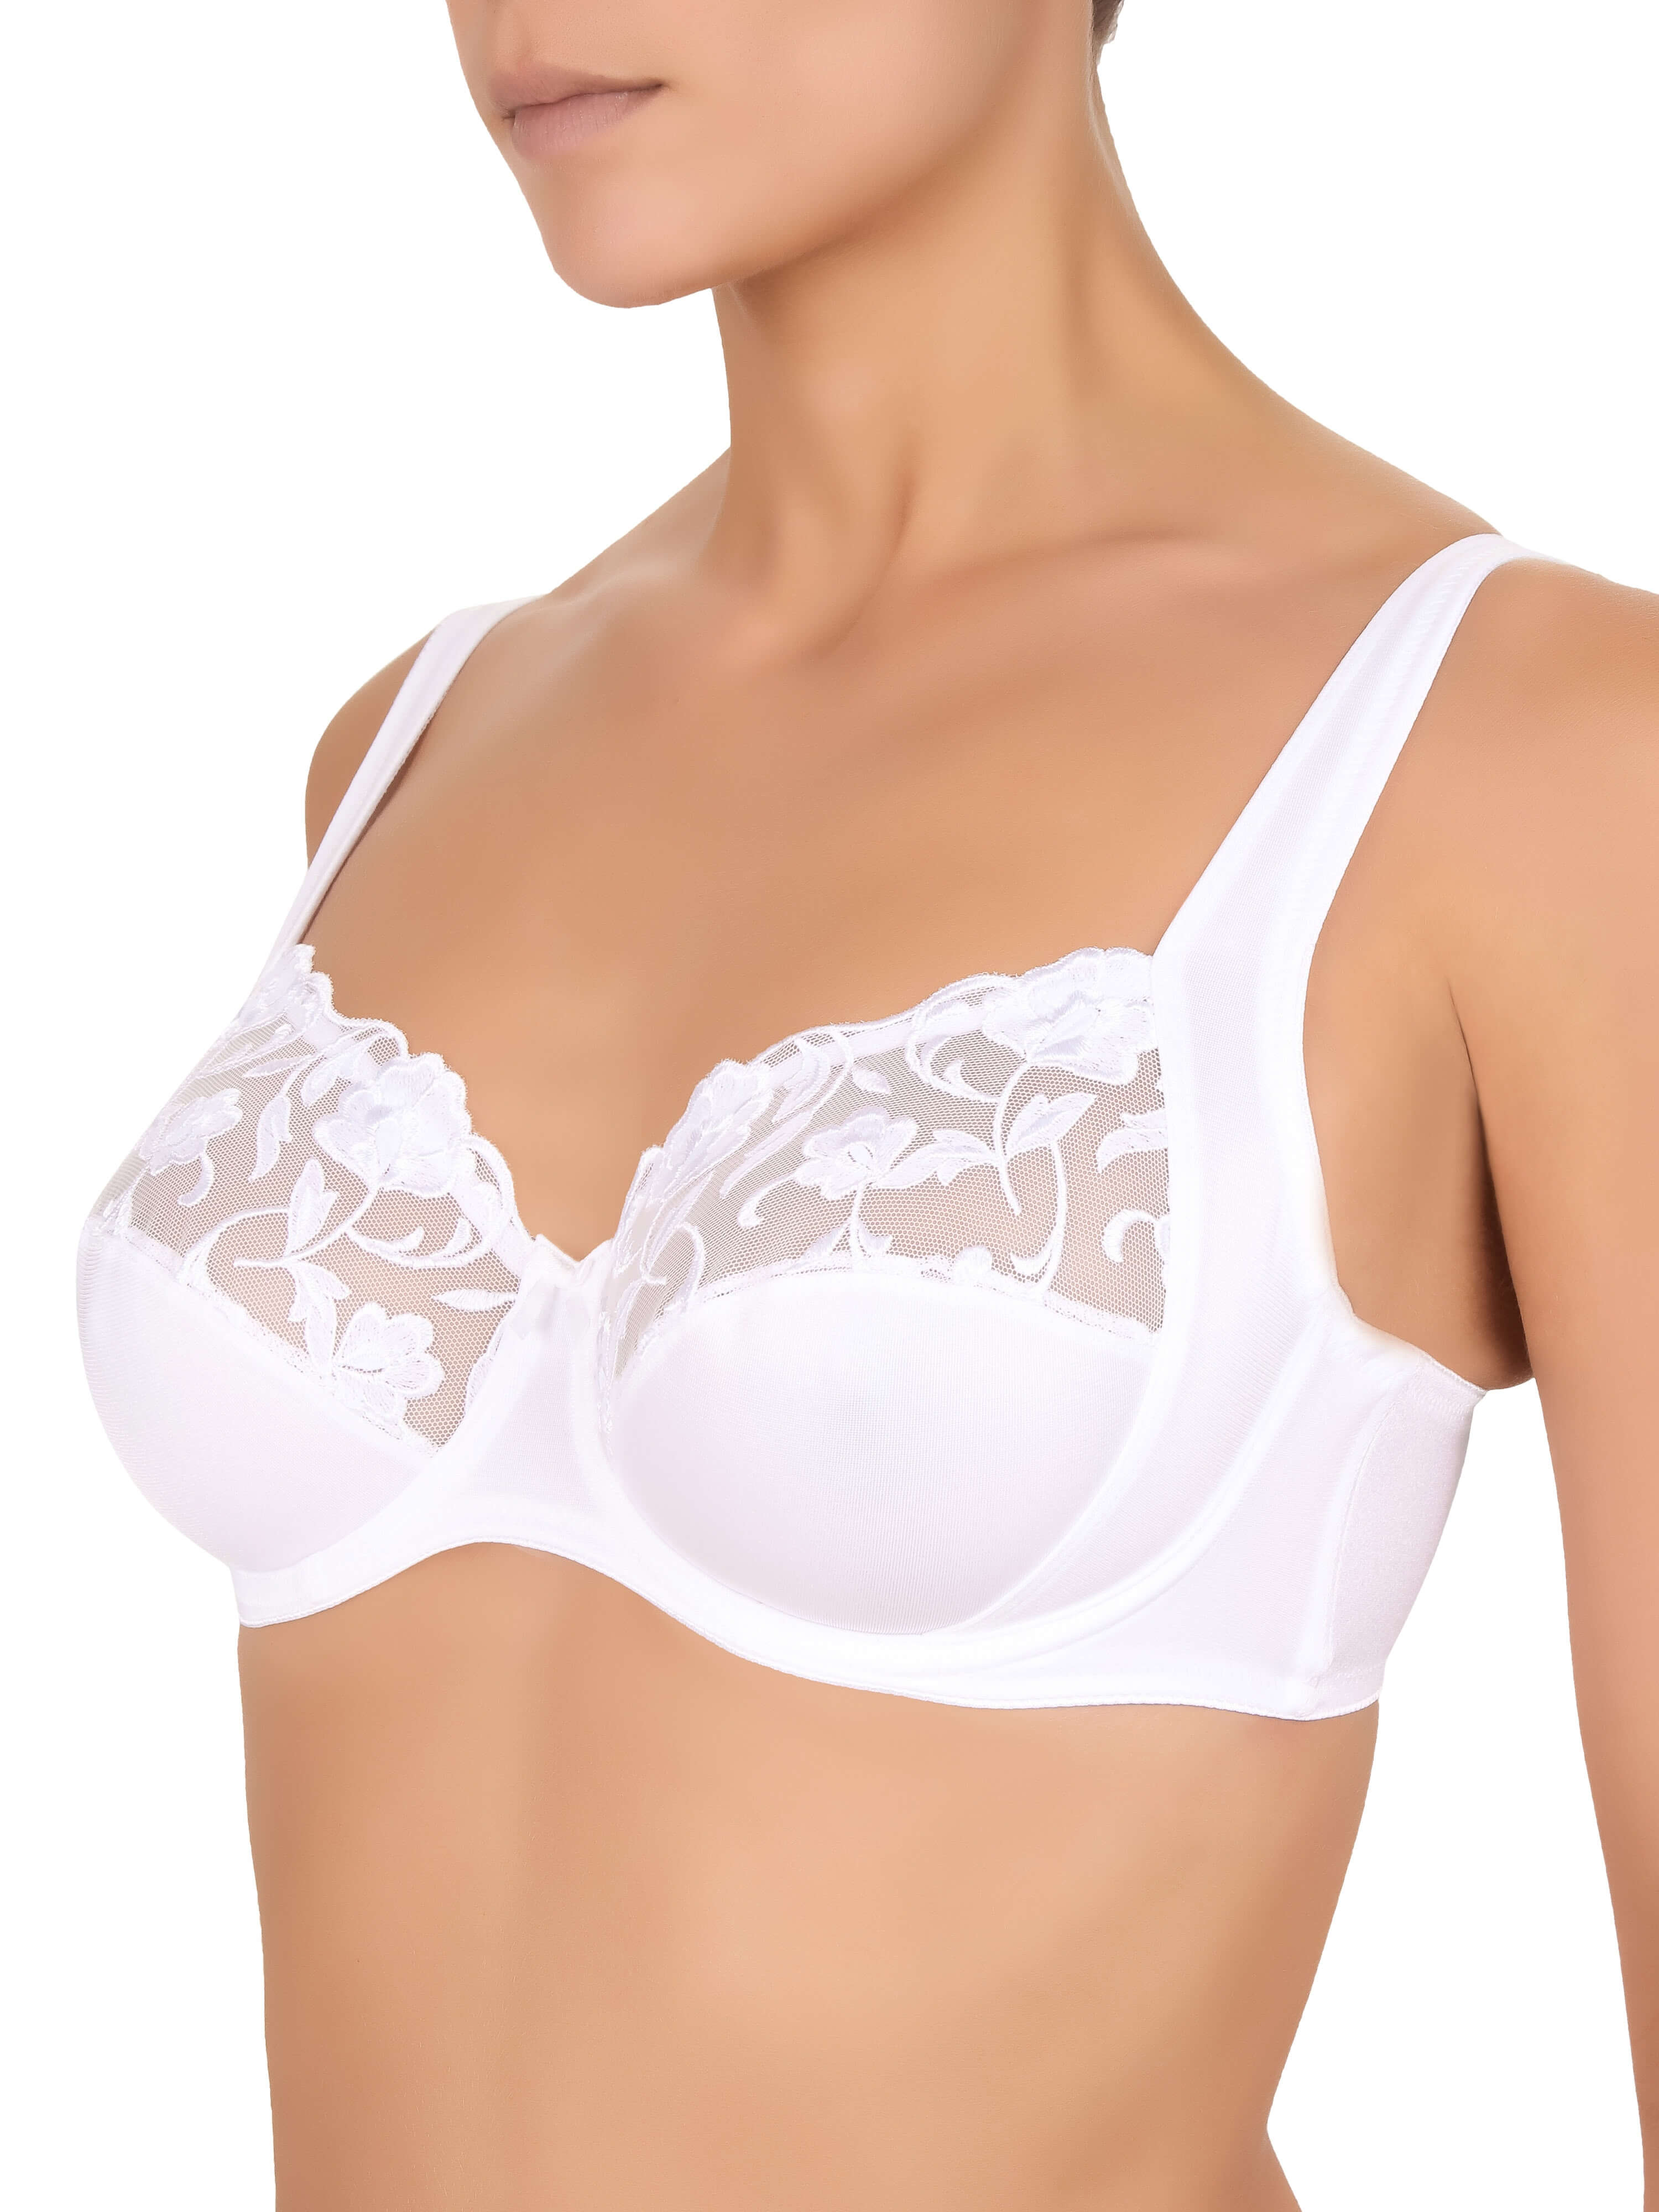 Felina Moments Bra Without Wire, Σουτιέν, Μεγάλες cup, 80D, 85D